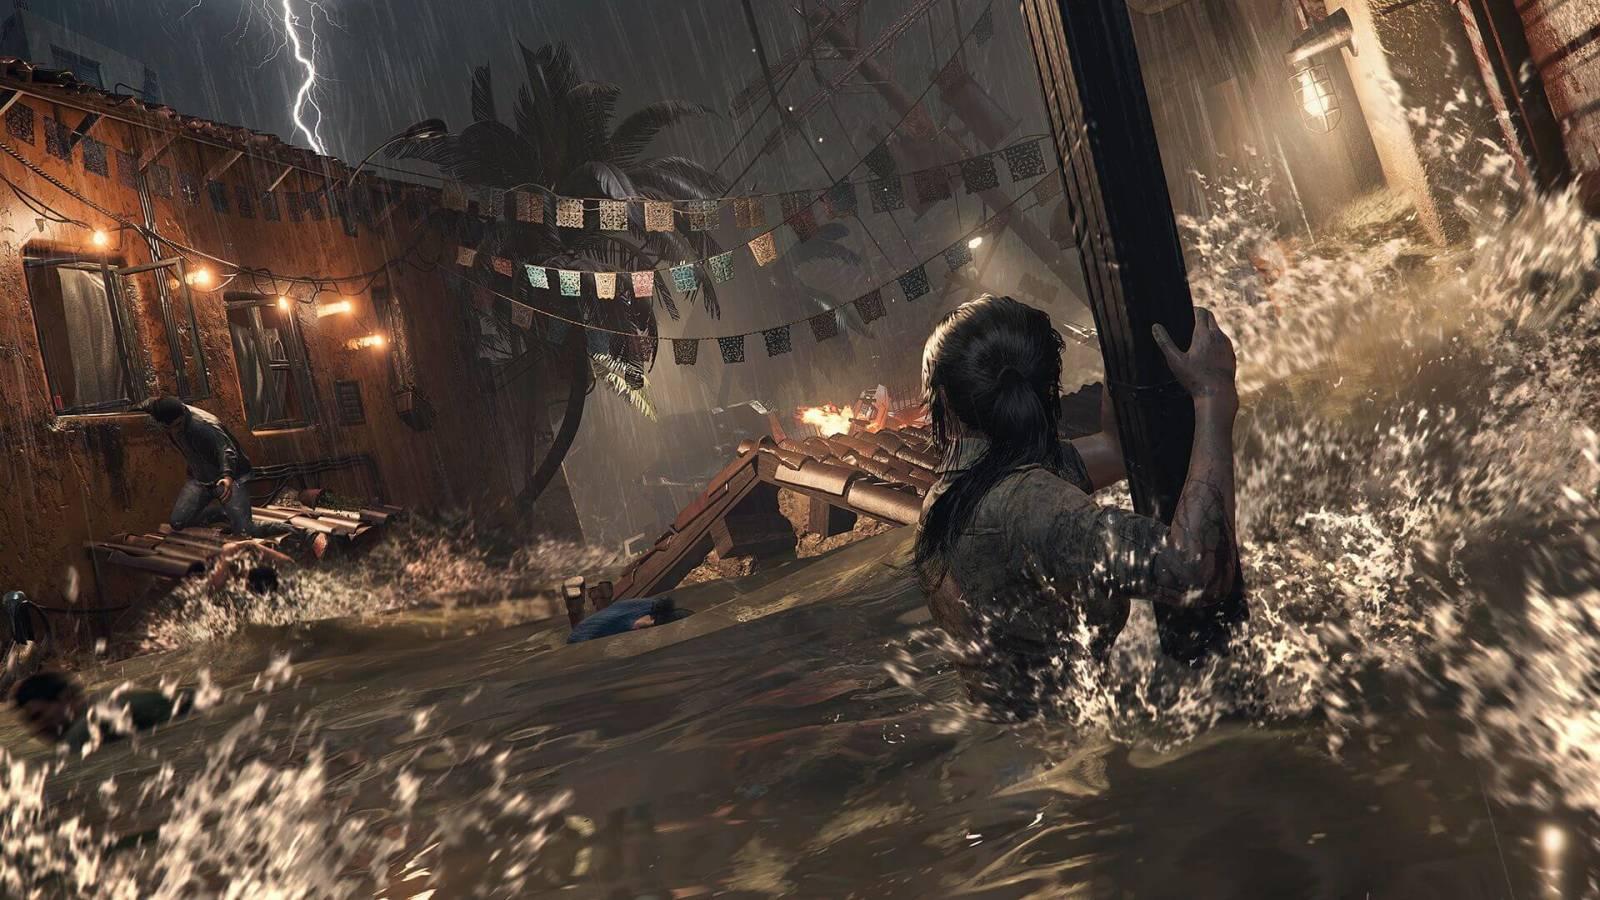 Lara Croft braves a stormy sea, gripping a ship's mast in turbulent waters, with lightning streaking the sky in this gripping Tomb Raider moment.